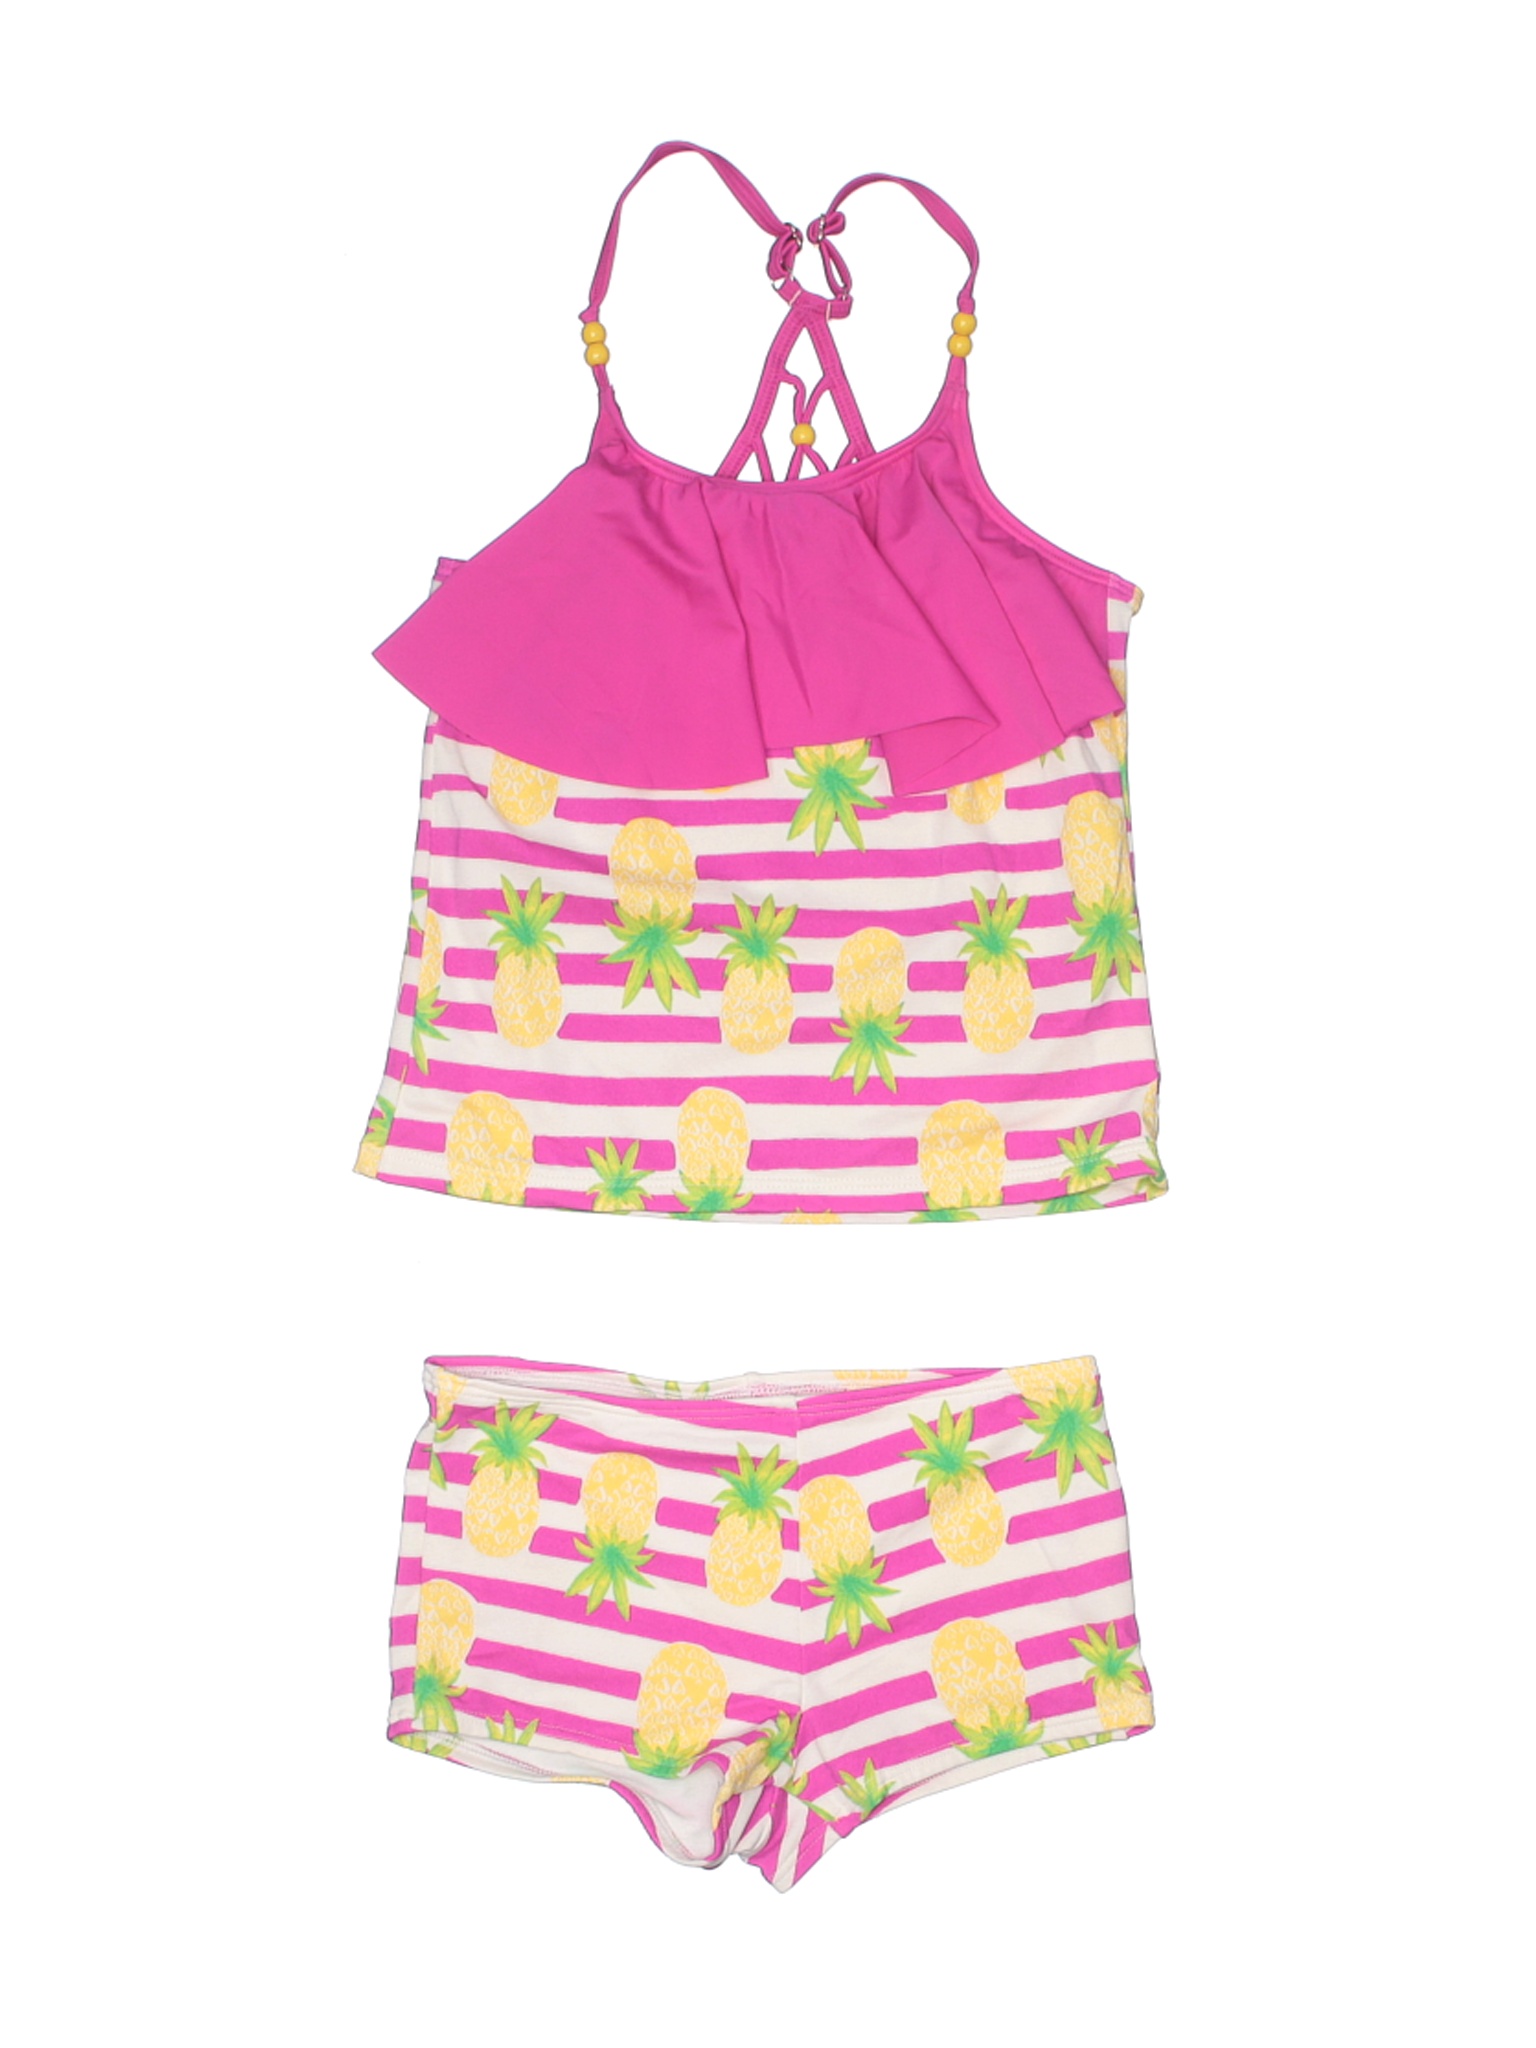 Lands' End Girls Pink Two Piece Swimsuit 10 | eBay